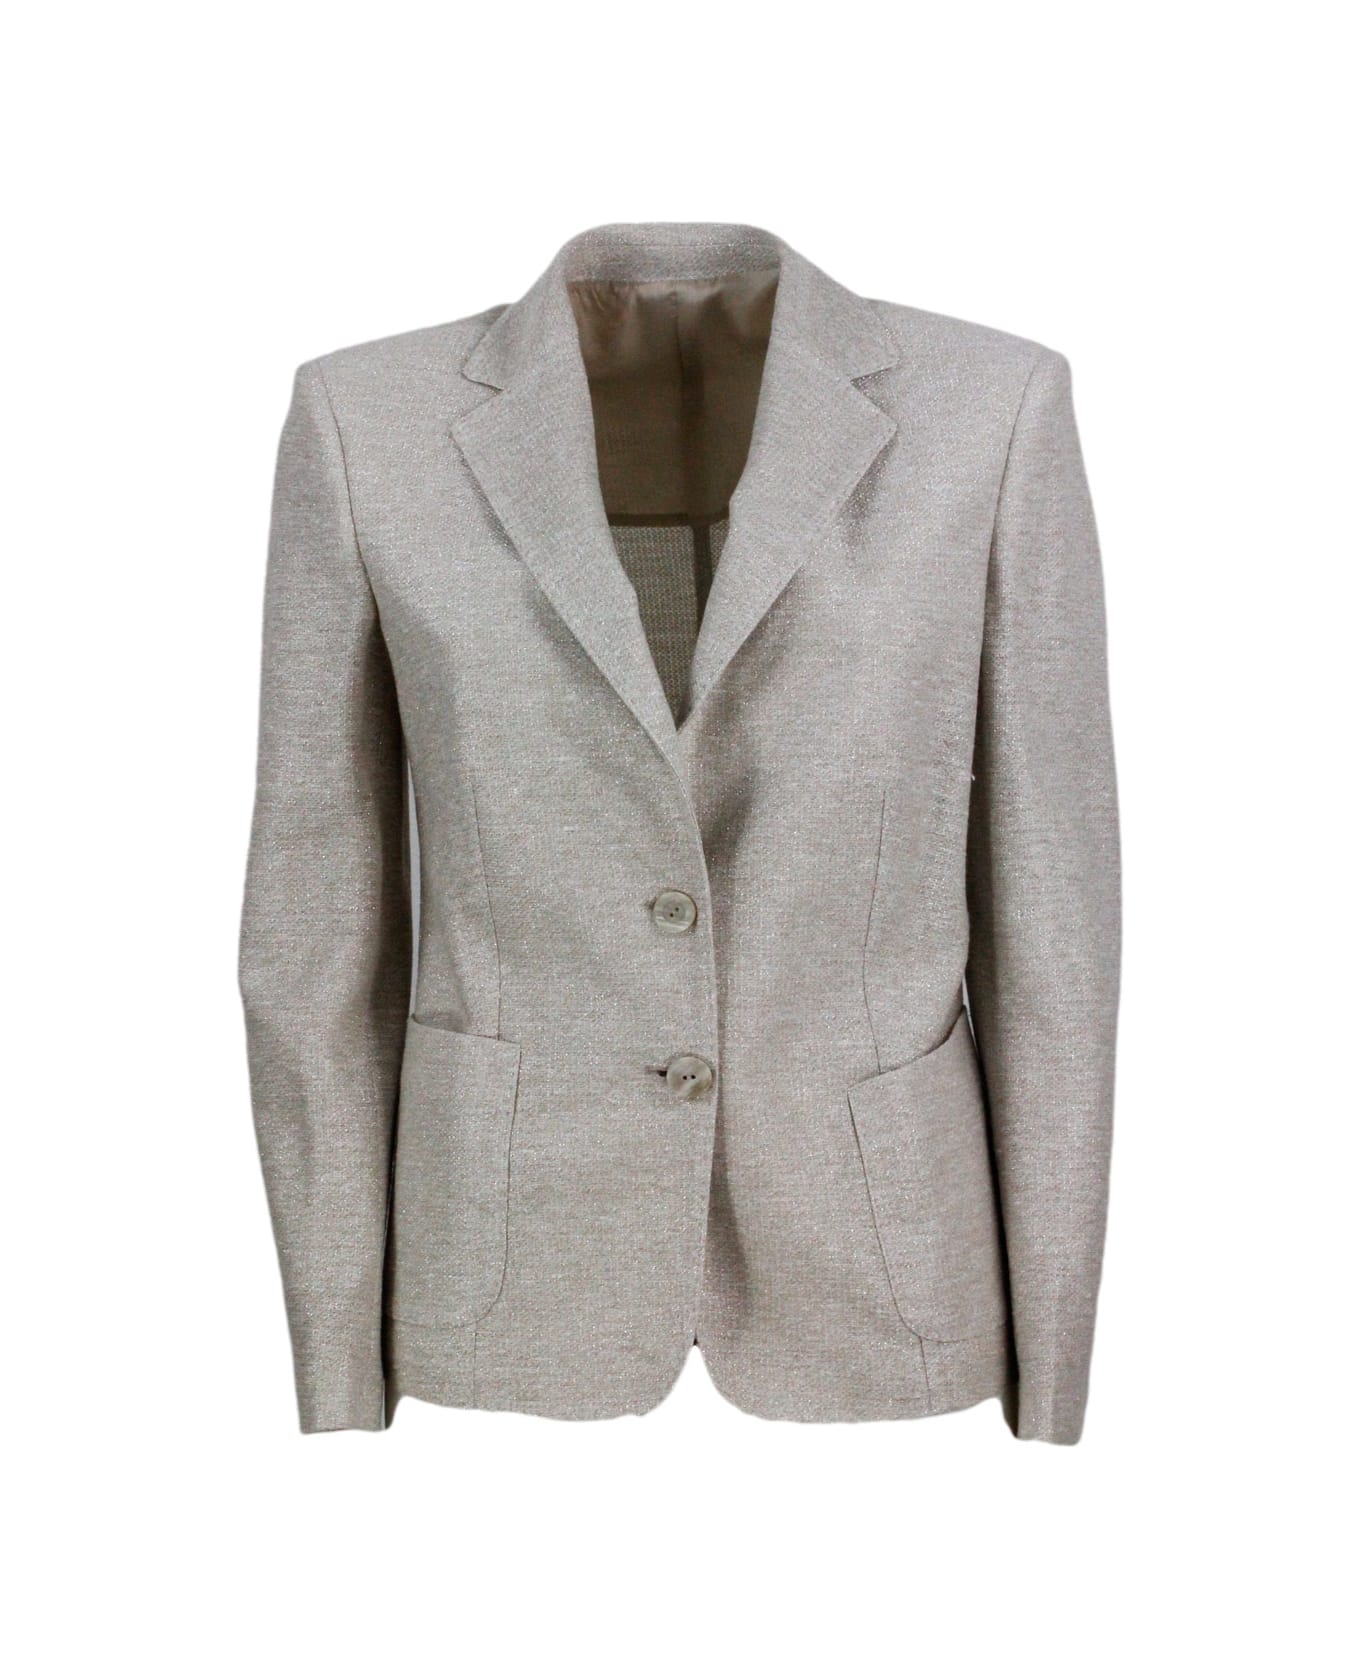 Barba Napoli Single-breasted Two-button Jacket Made Of Linen And Cotton And Embellished With Bright Lurex Threads - Gold ブレザー